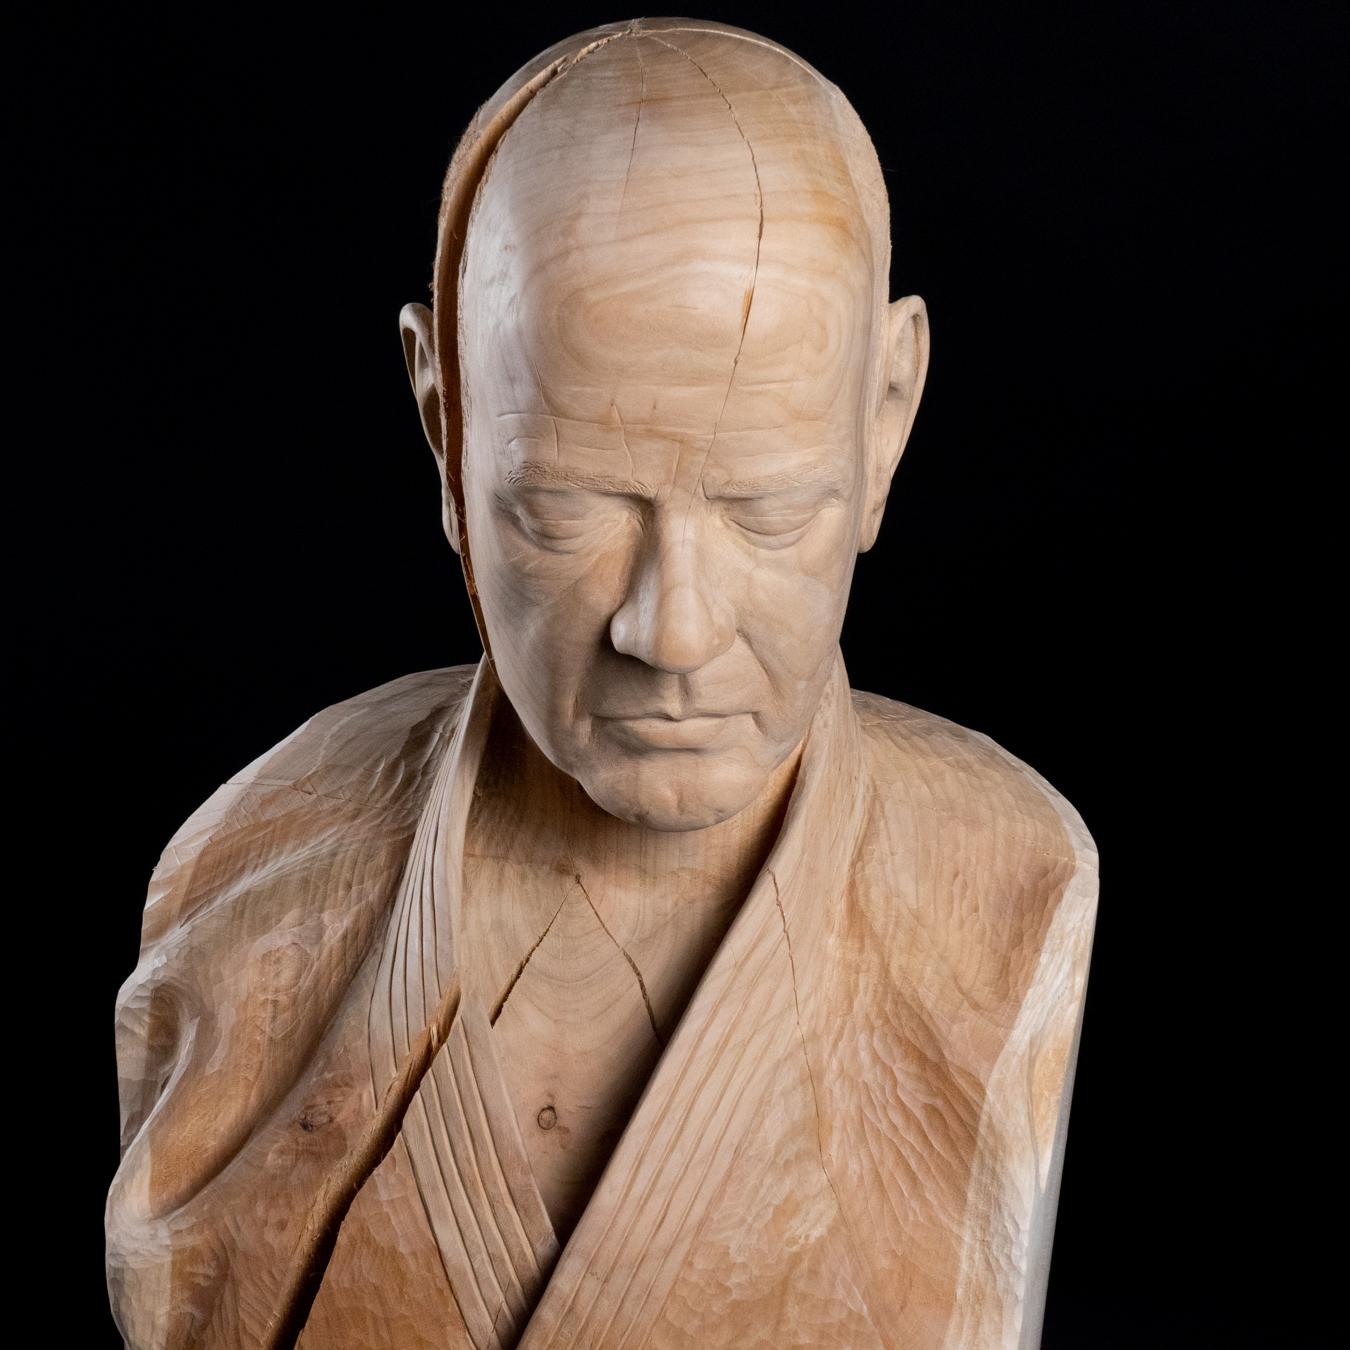 Yume- No- Uchi, Dreaming- 21st Century Contemporary Wooden Sculpture of a Judoka - Brown Figurative Sculpture by Boris Paval Conen